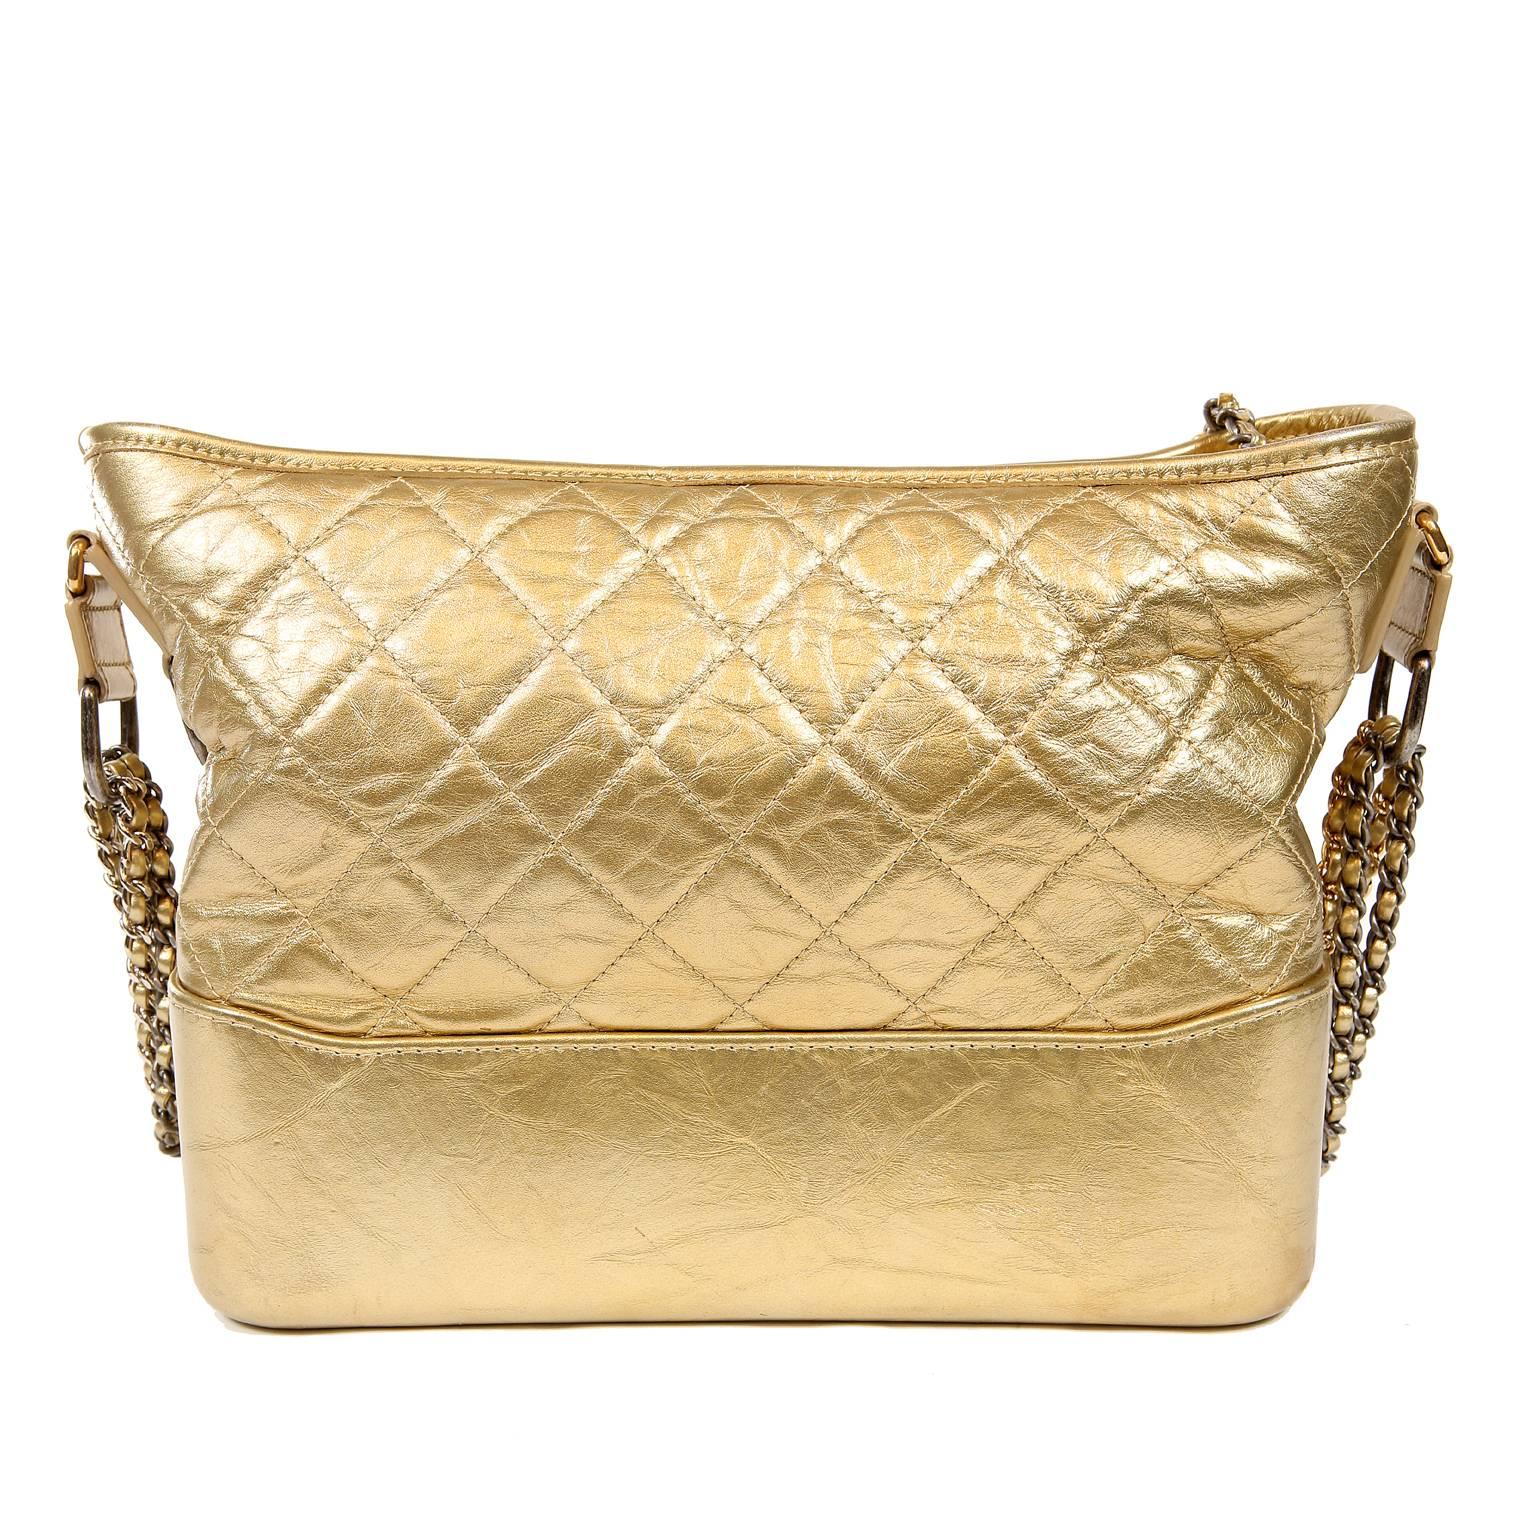 Chanel Gold Aged Calfskin Gabrielle Crossbody Hobo- PRISTINE; appears never carried.
Chanel’s newest silhouette, the Gabrielle, in matte metallic gold.  Intentionally “distressed” gold aged calfskin with signature Chanel diamond quilting on top